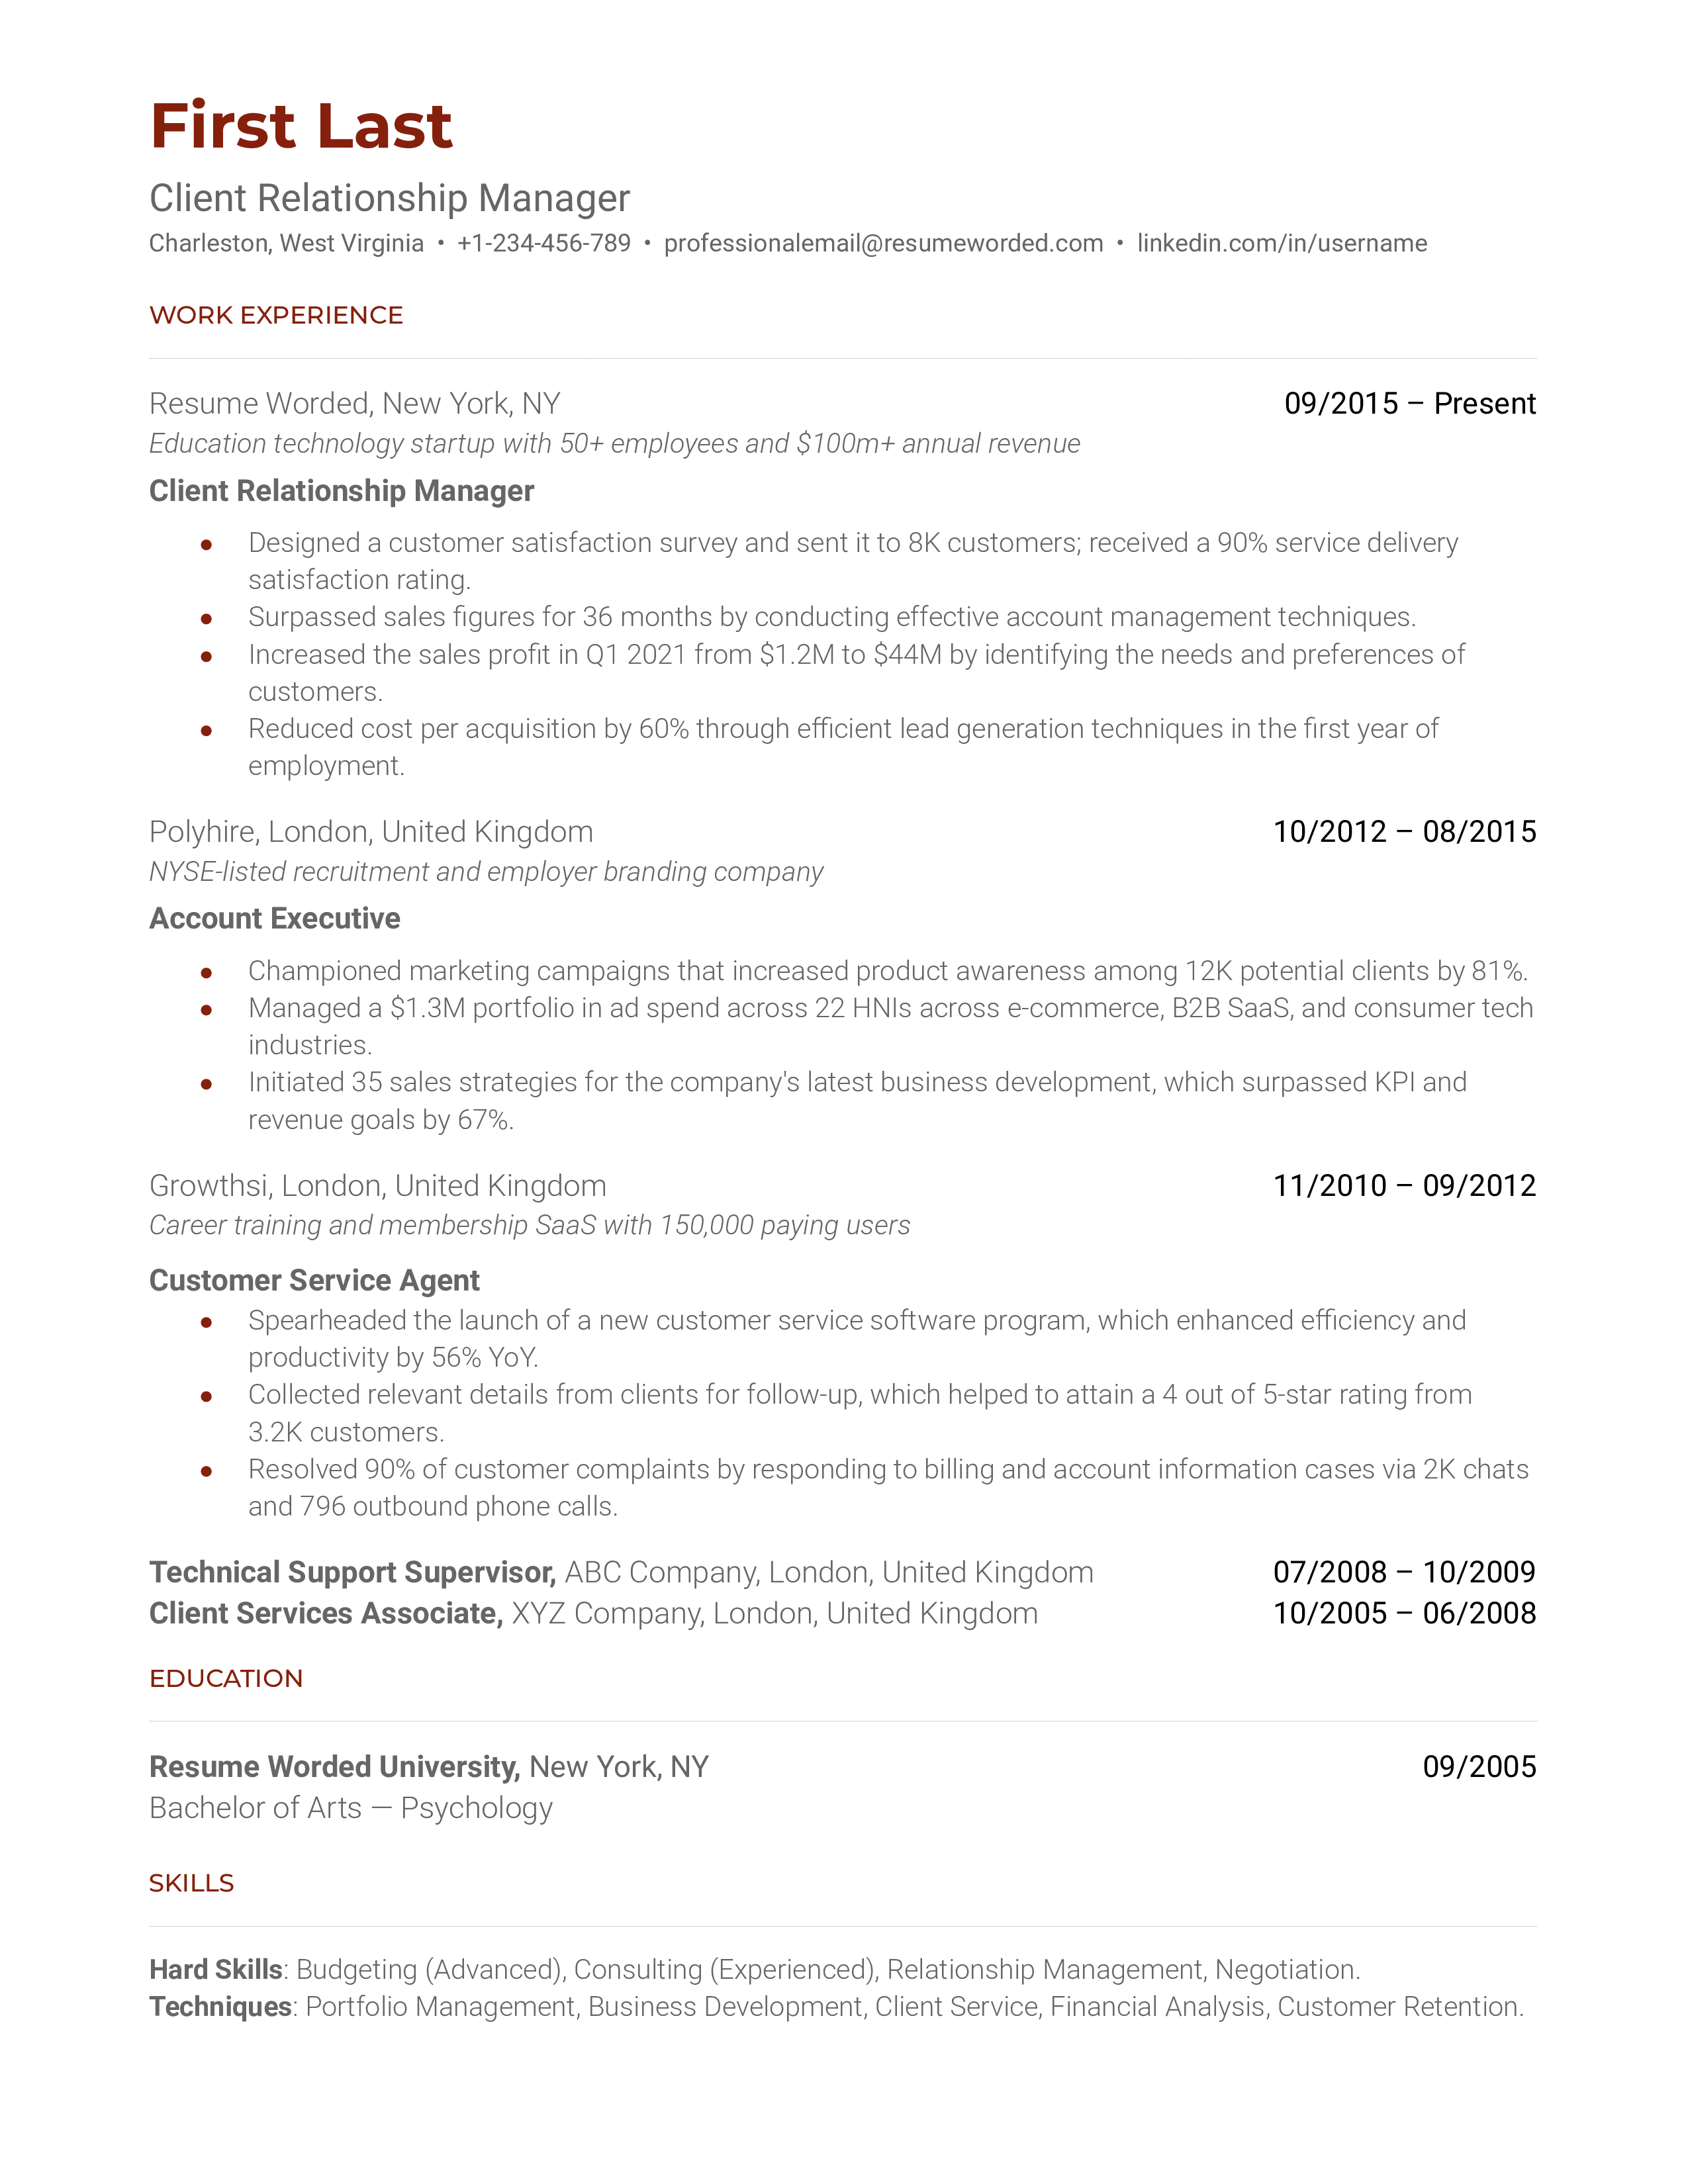 A CV showcasing a Client Relationship Manager's skills and achievements.